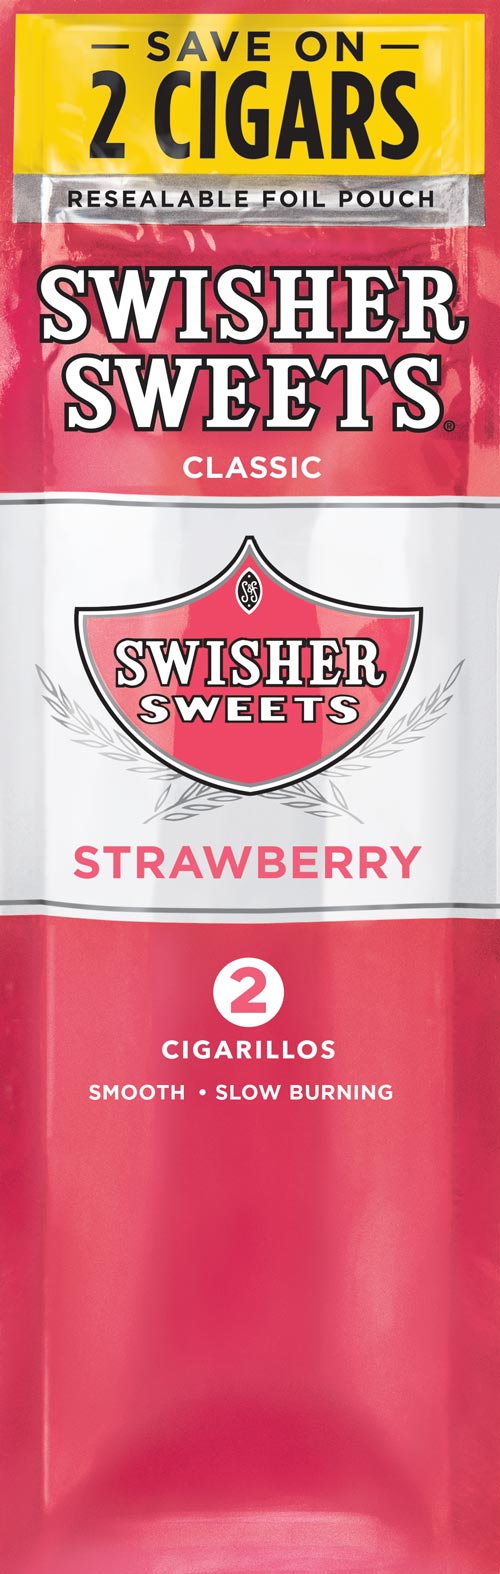 Swisher Sweets Cigarillos - Strawberry